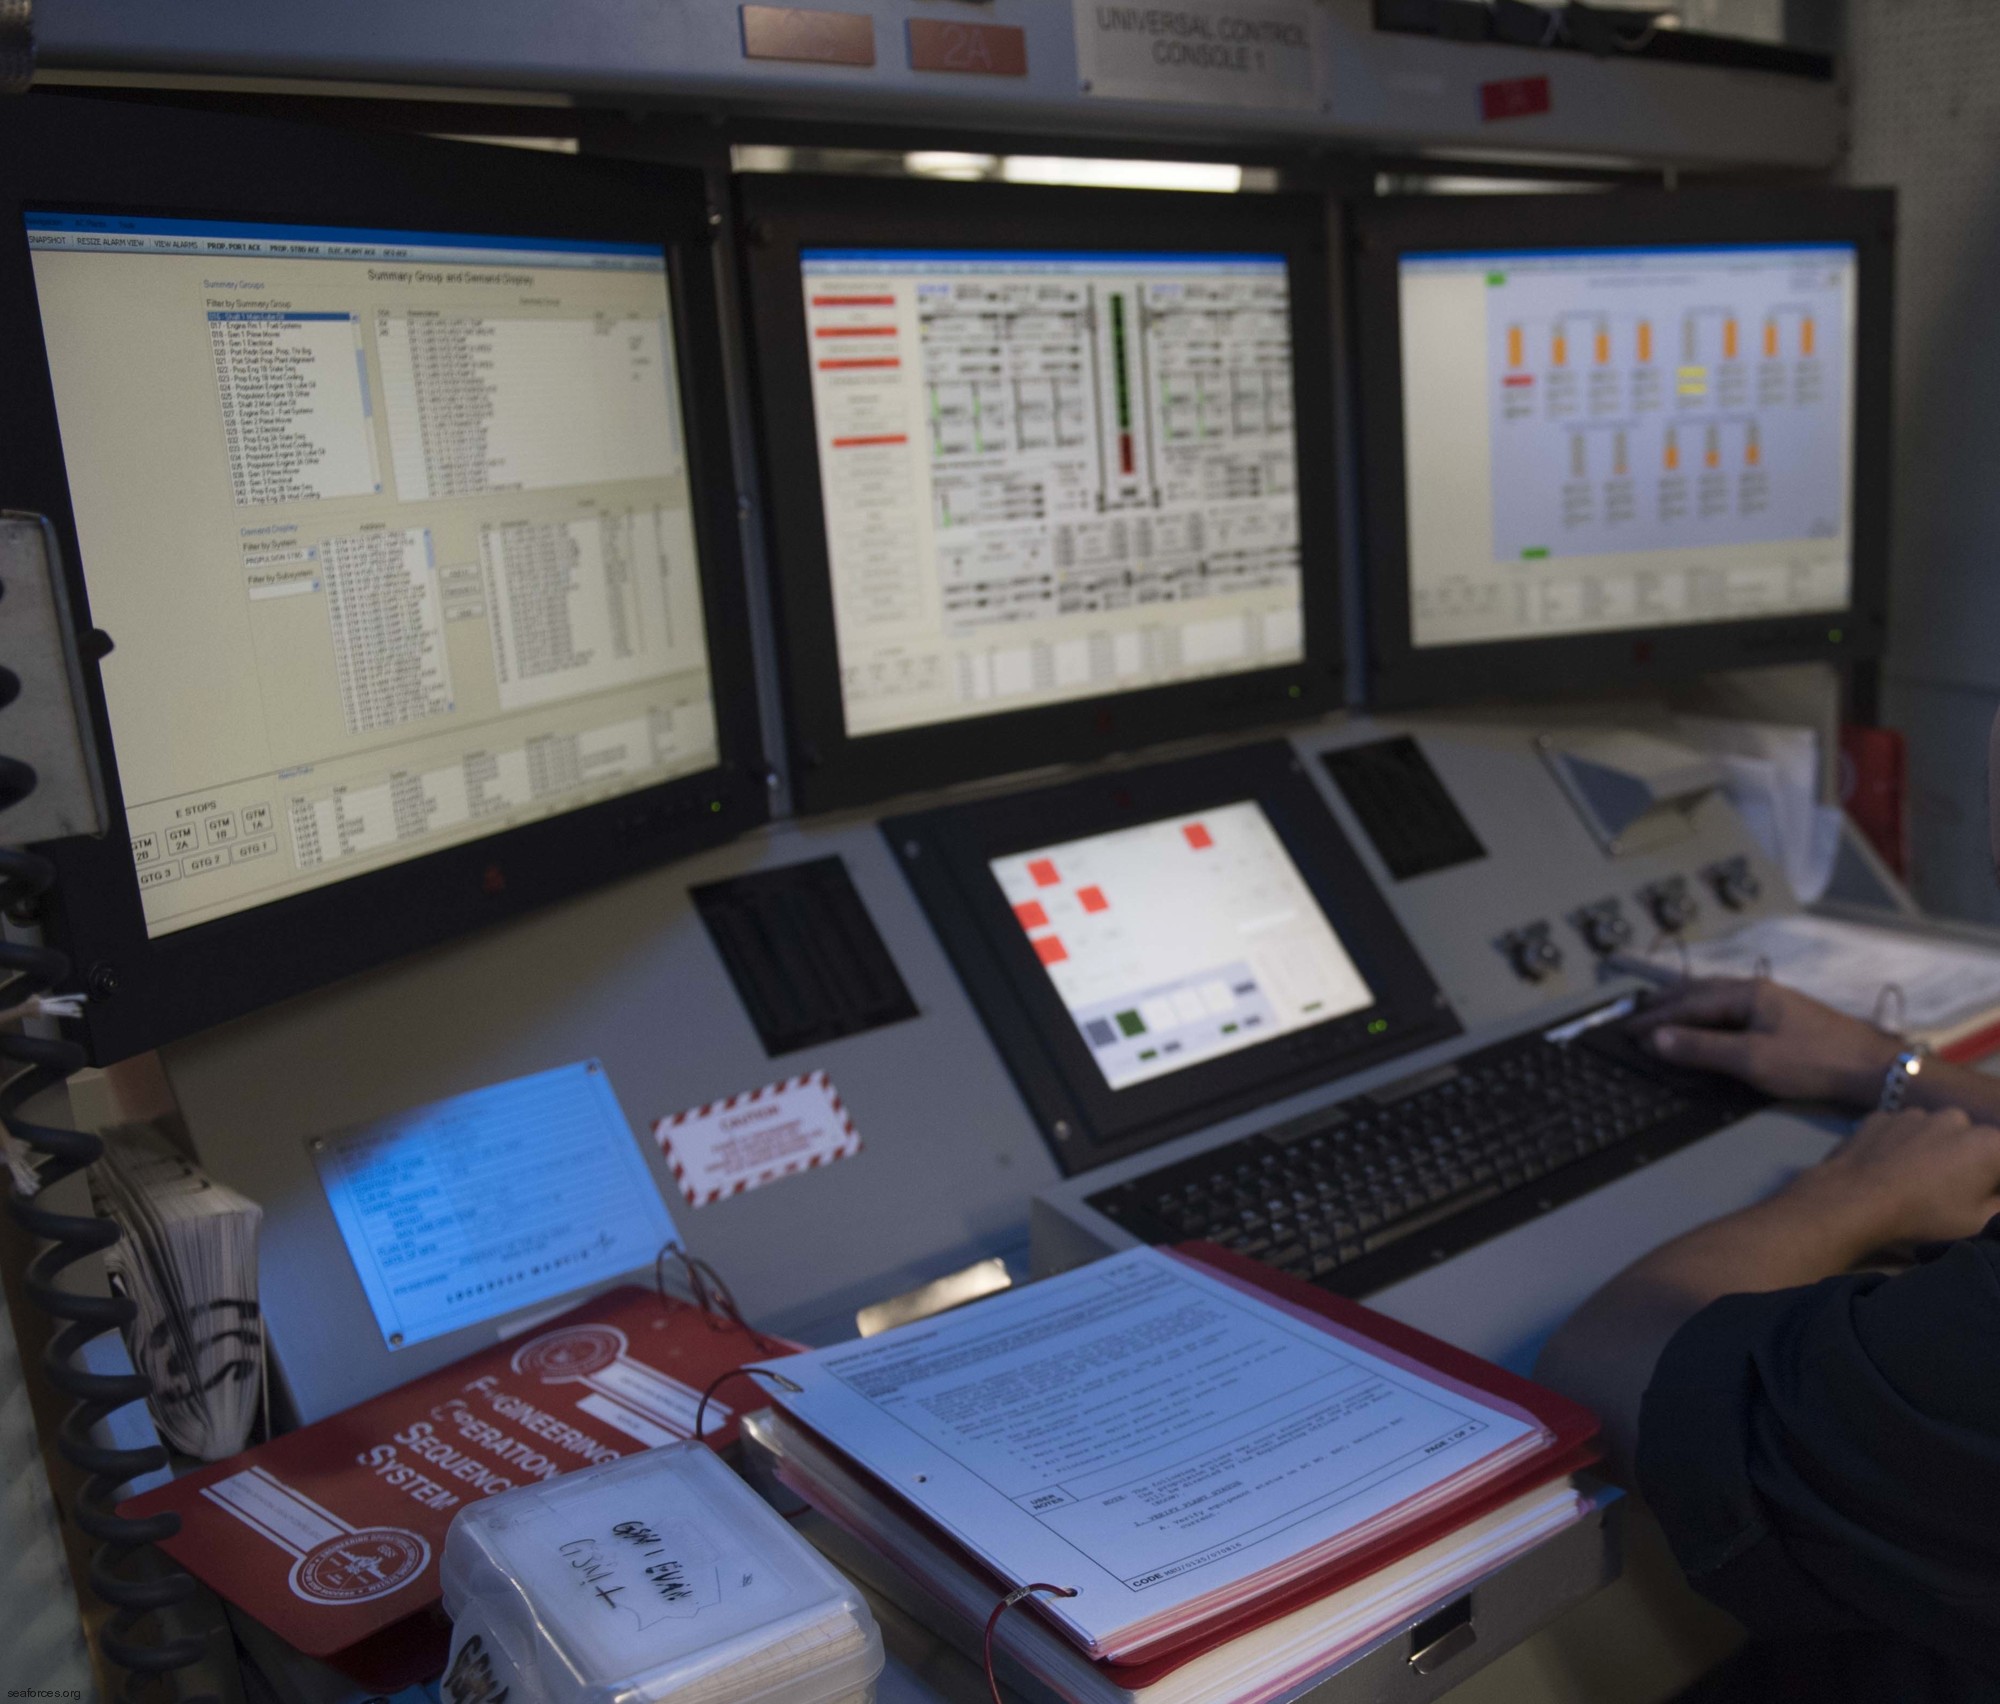 ddg-51 uss arleigh burke guided missile destroyer us navy 97 propulsion auxilary control console